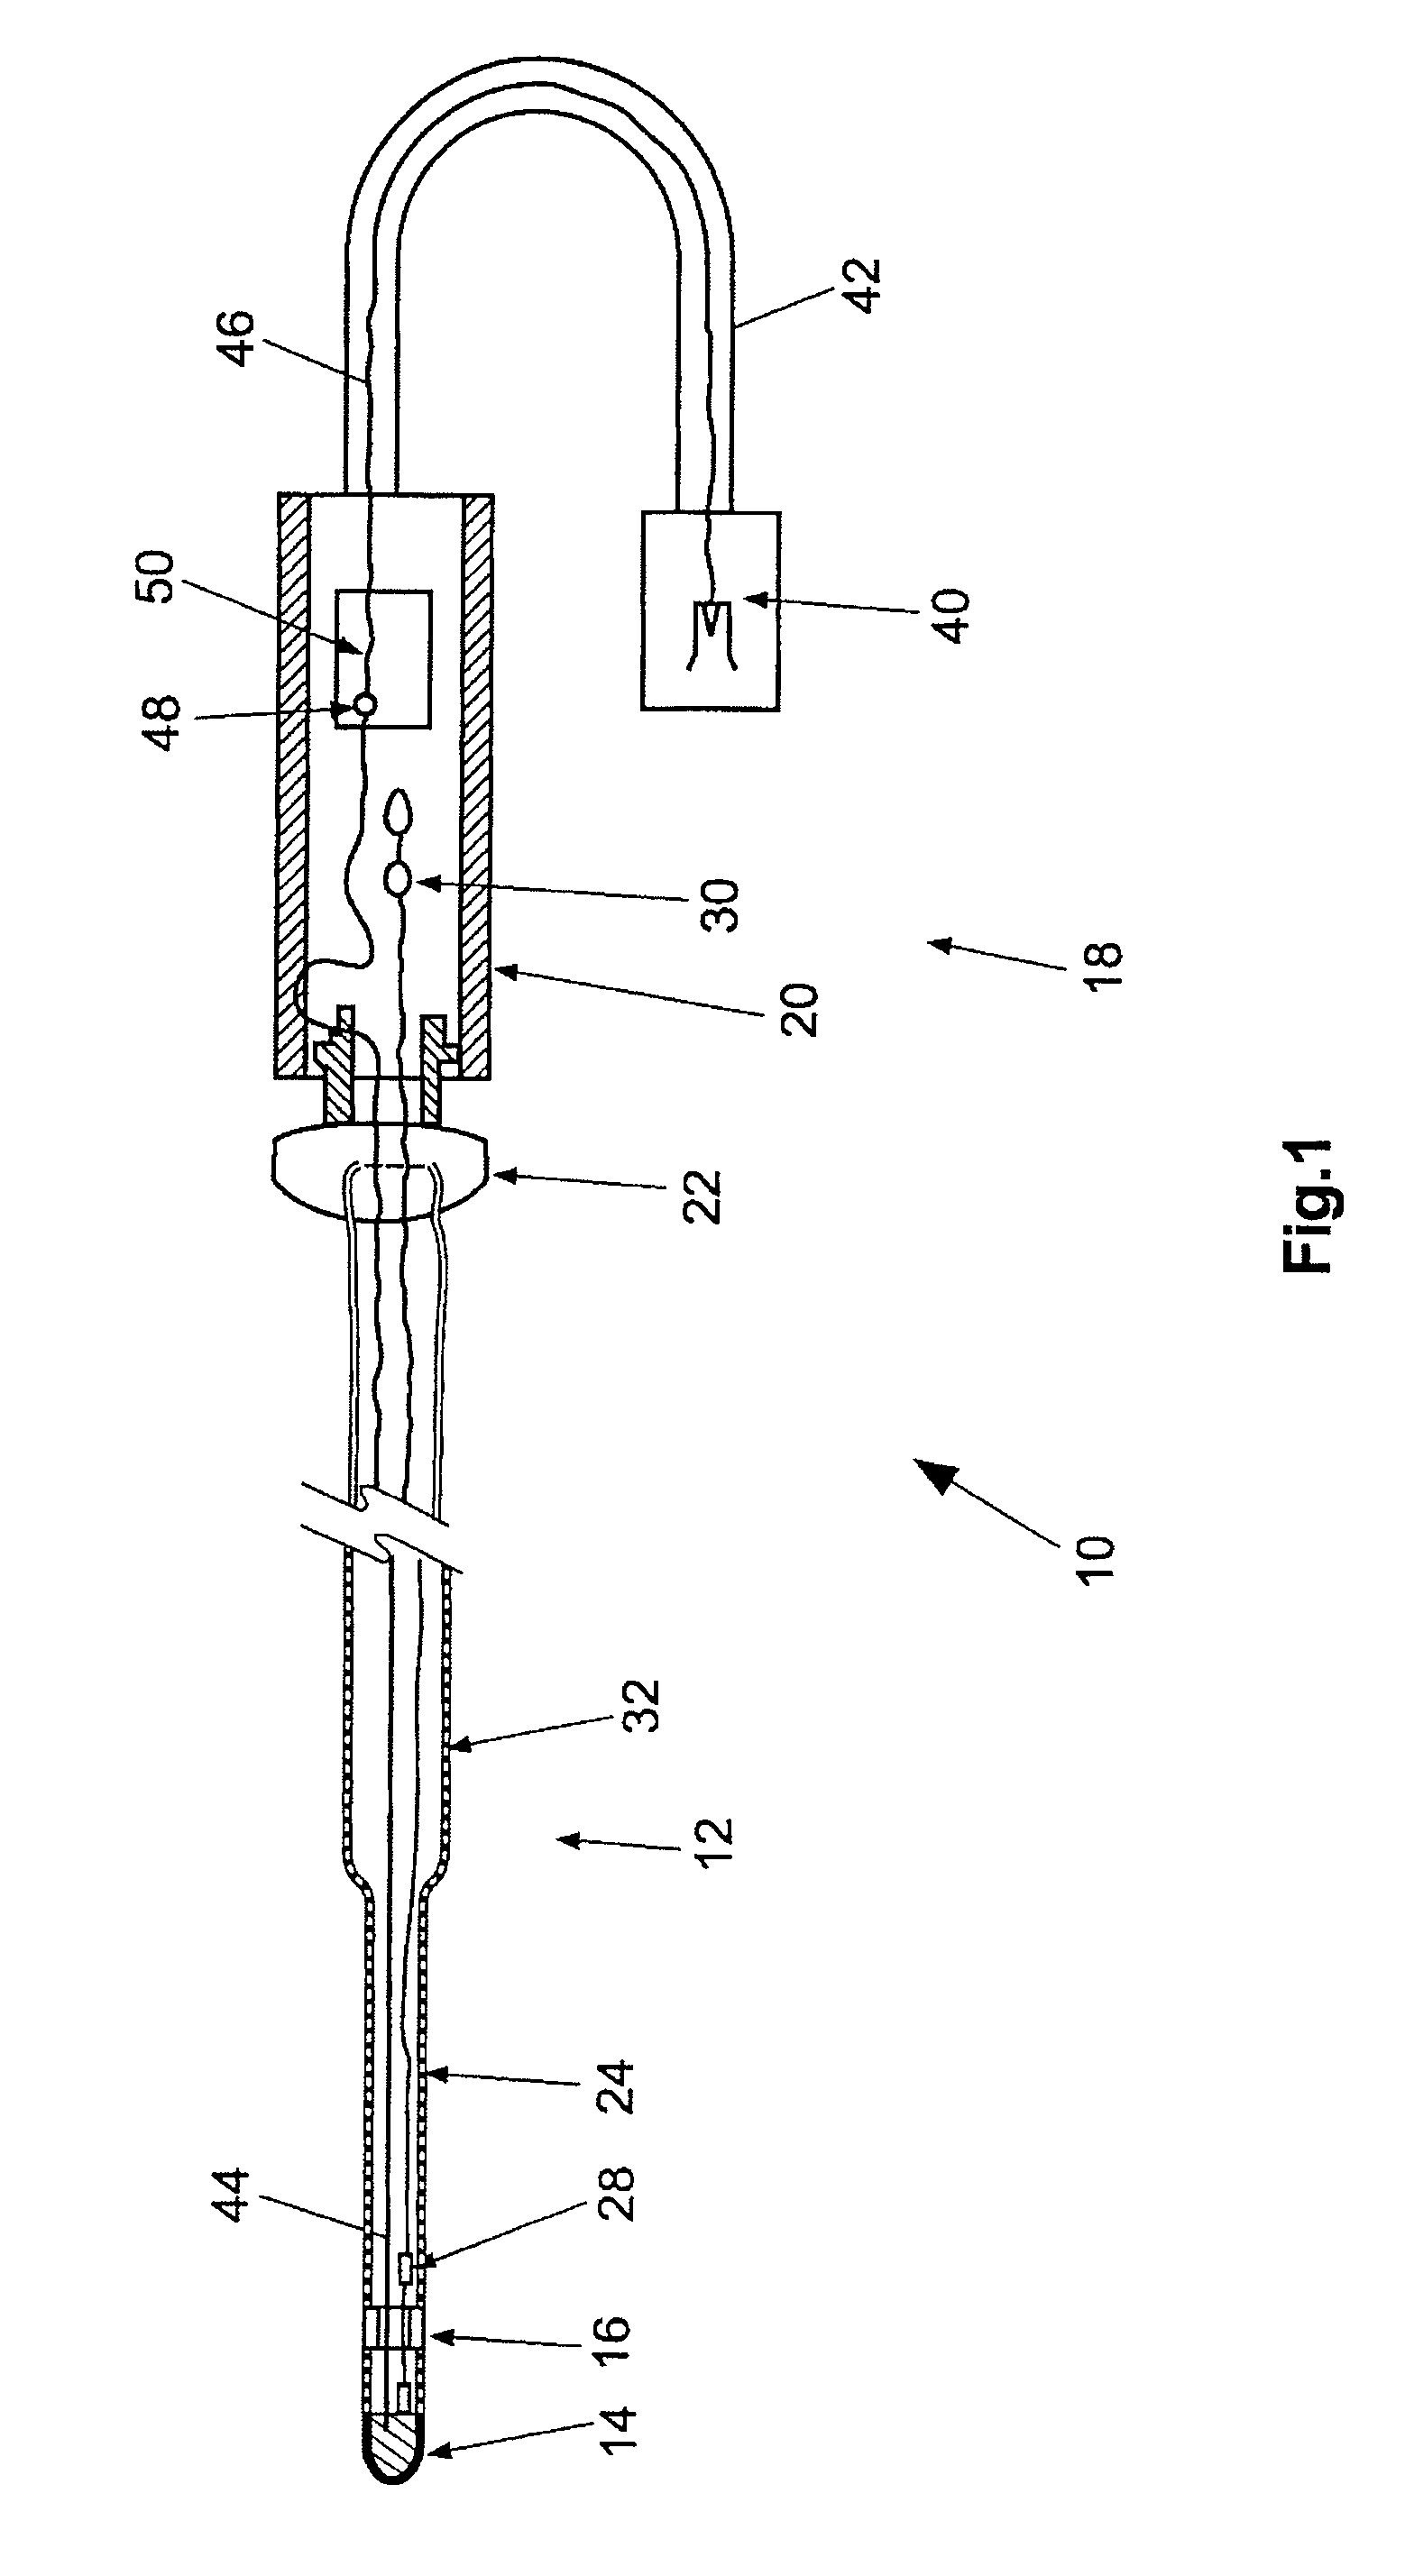 Electrode catheter for the electrotherapy of cardiac tissue